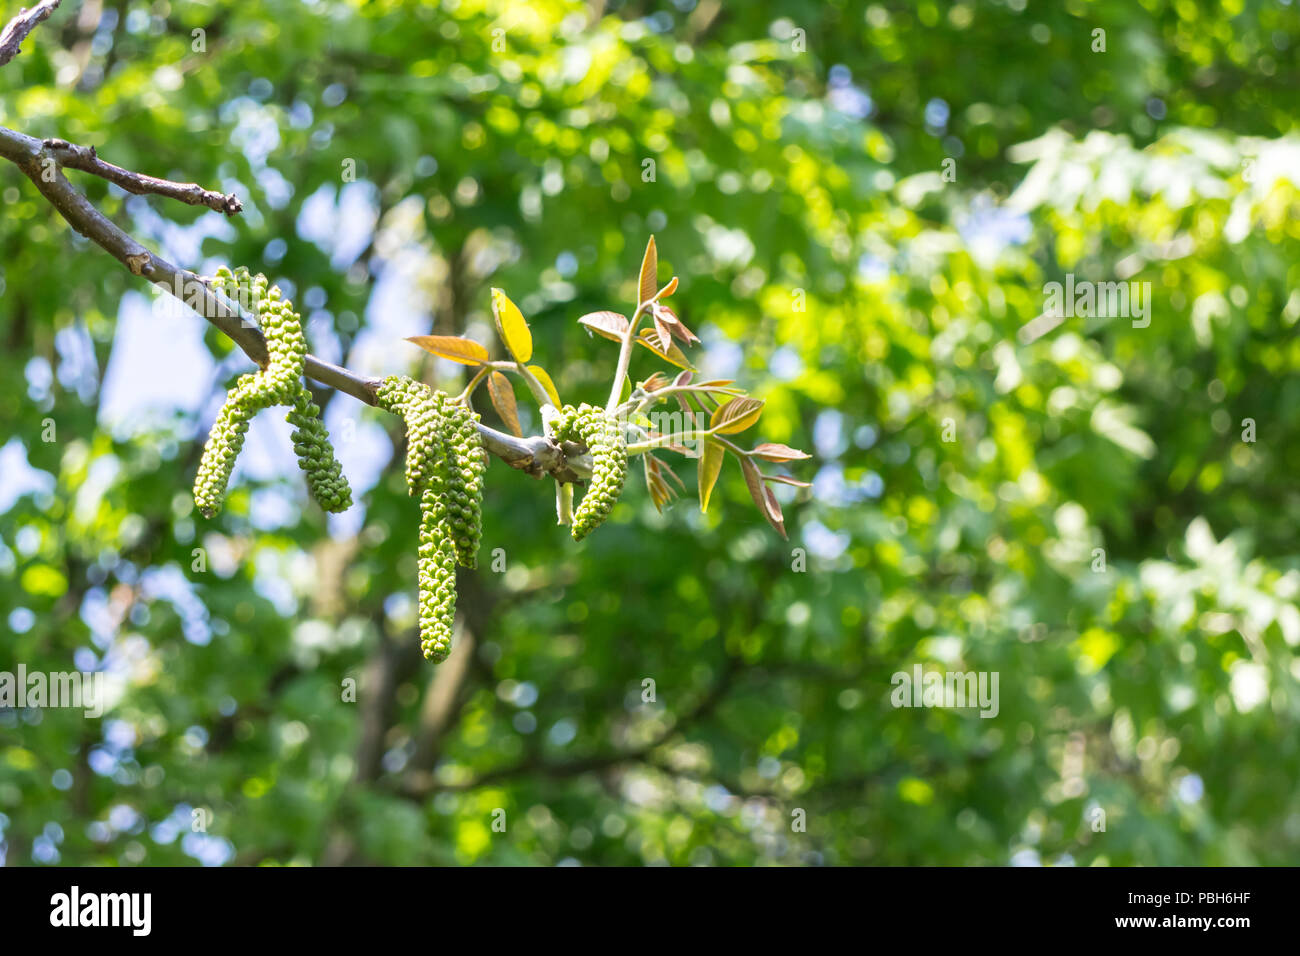 Male flower inflorescence of walnut on bunch of tree Stock Photo